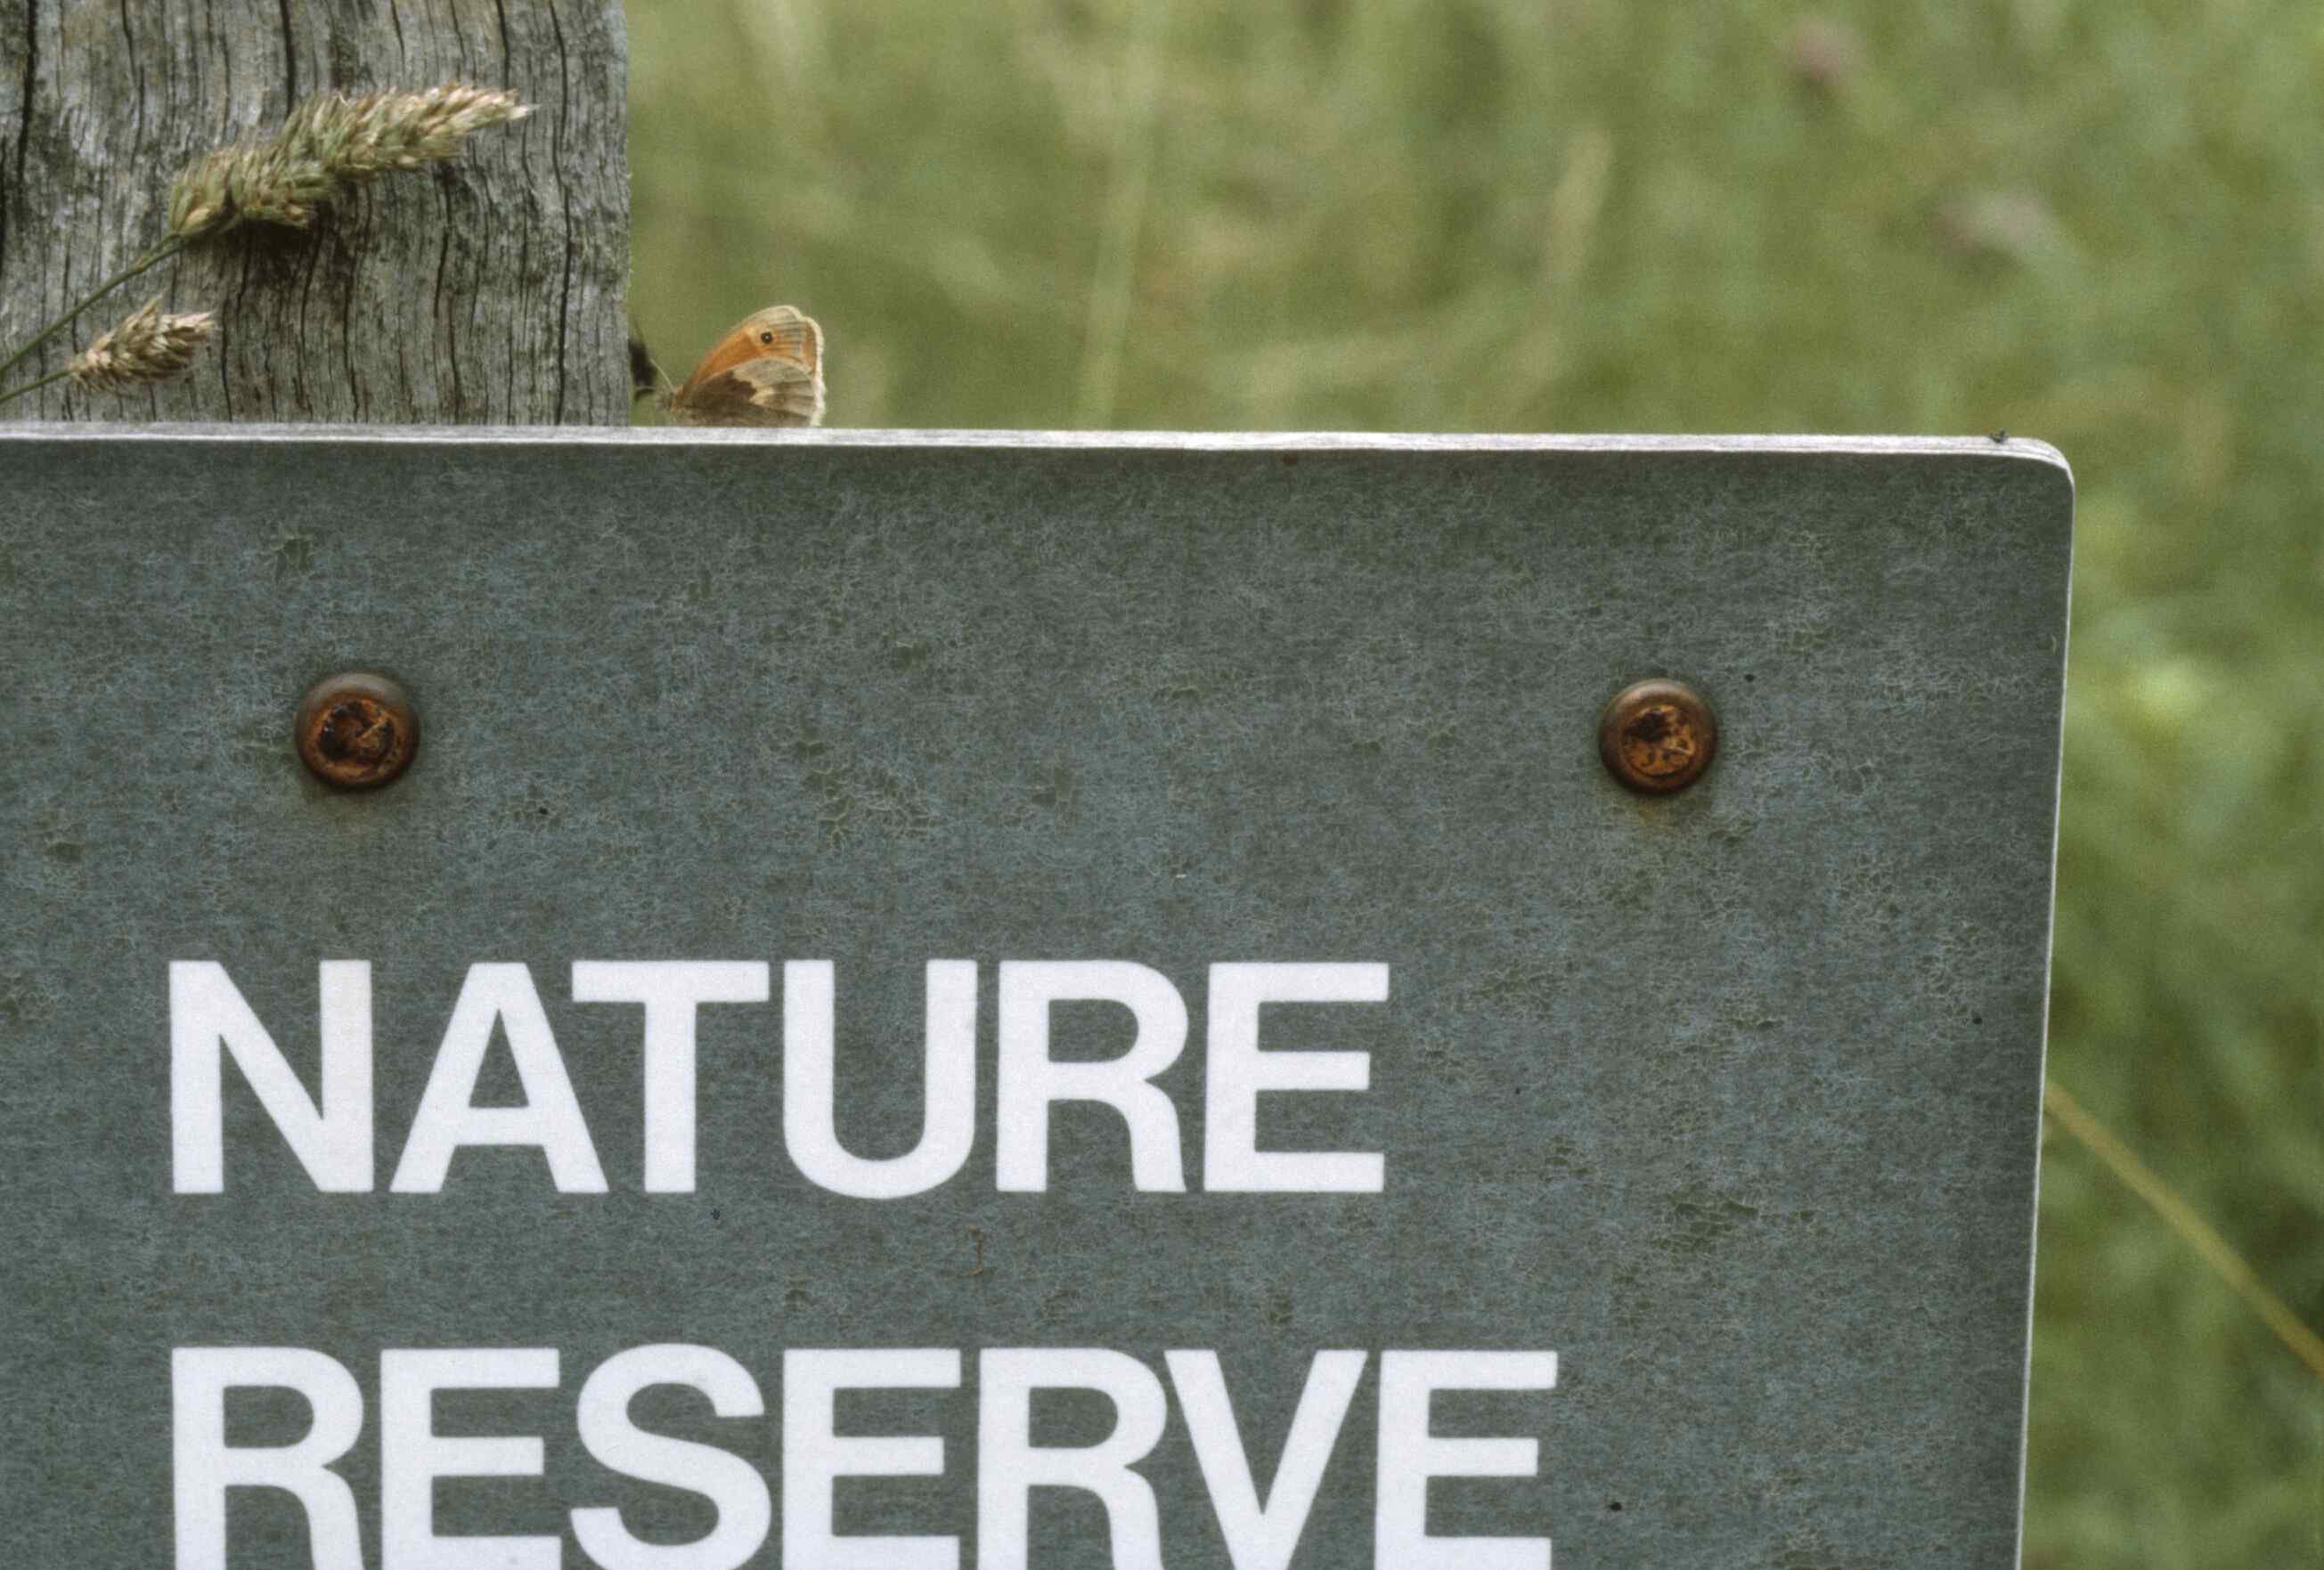 We like to consider it a garden nature reserve